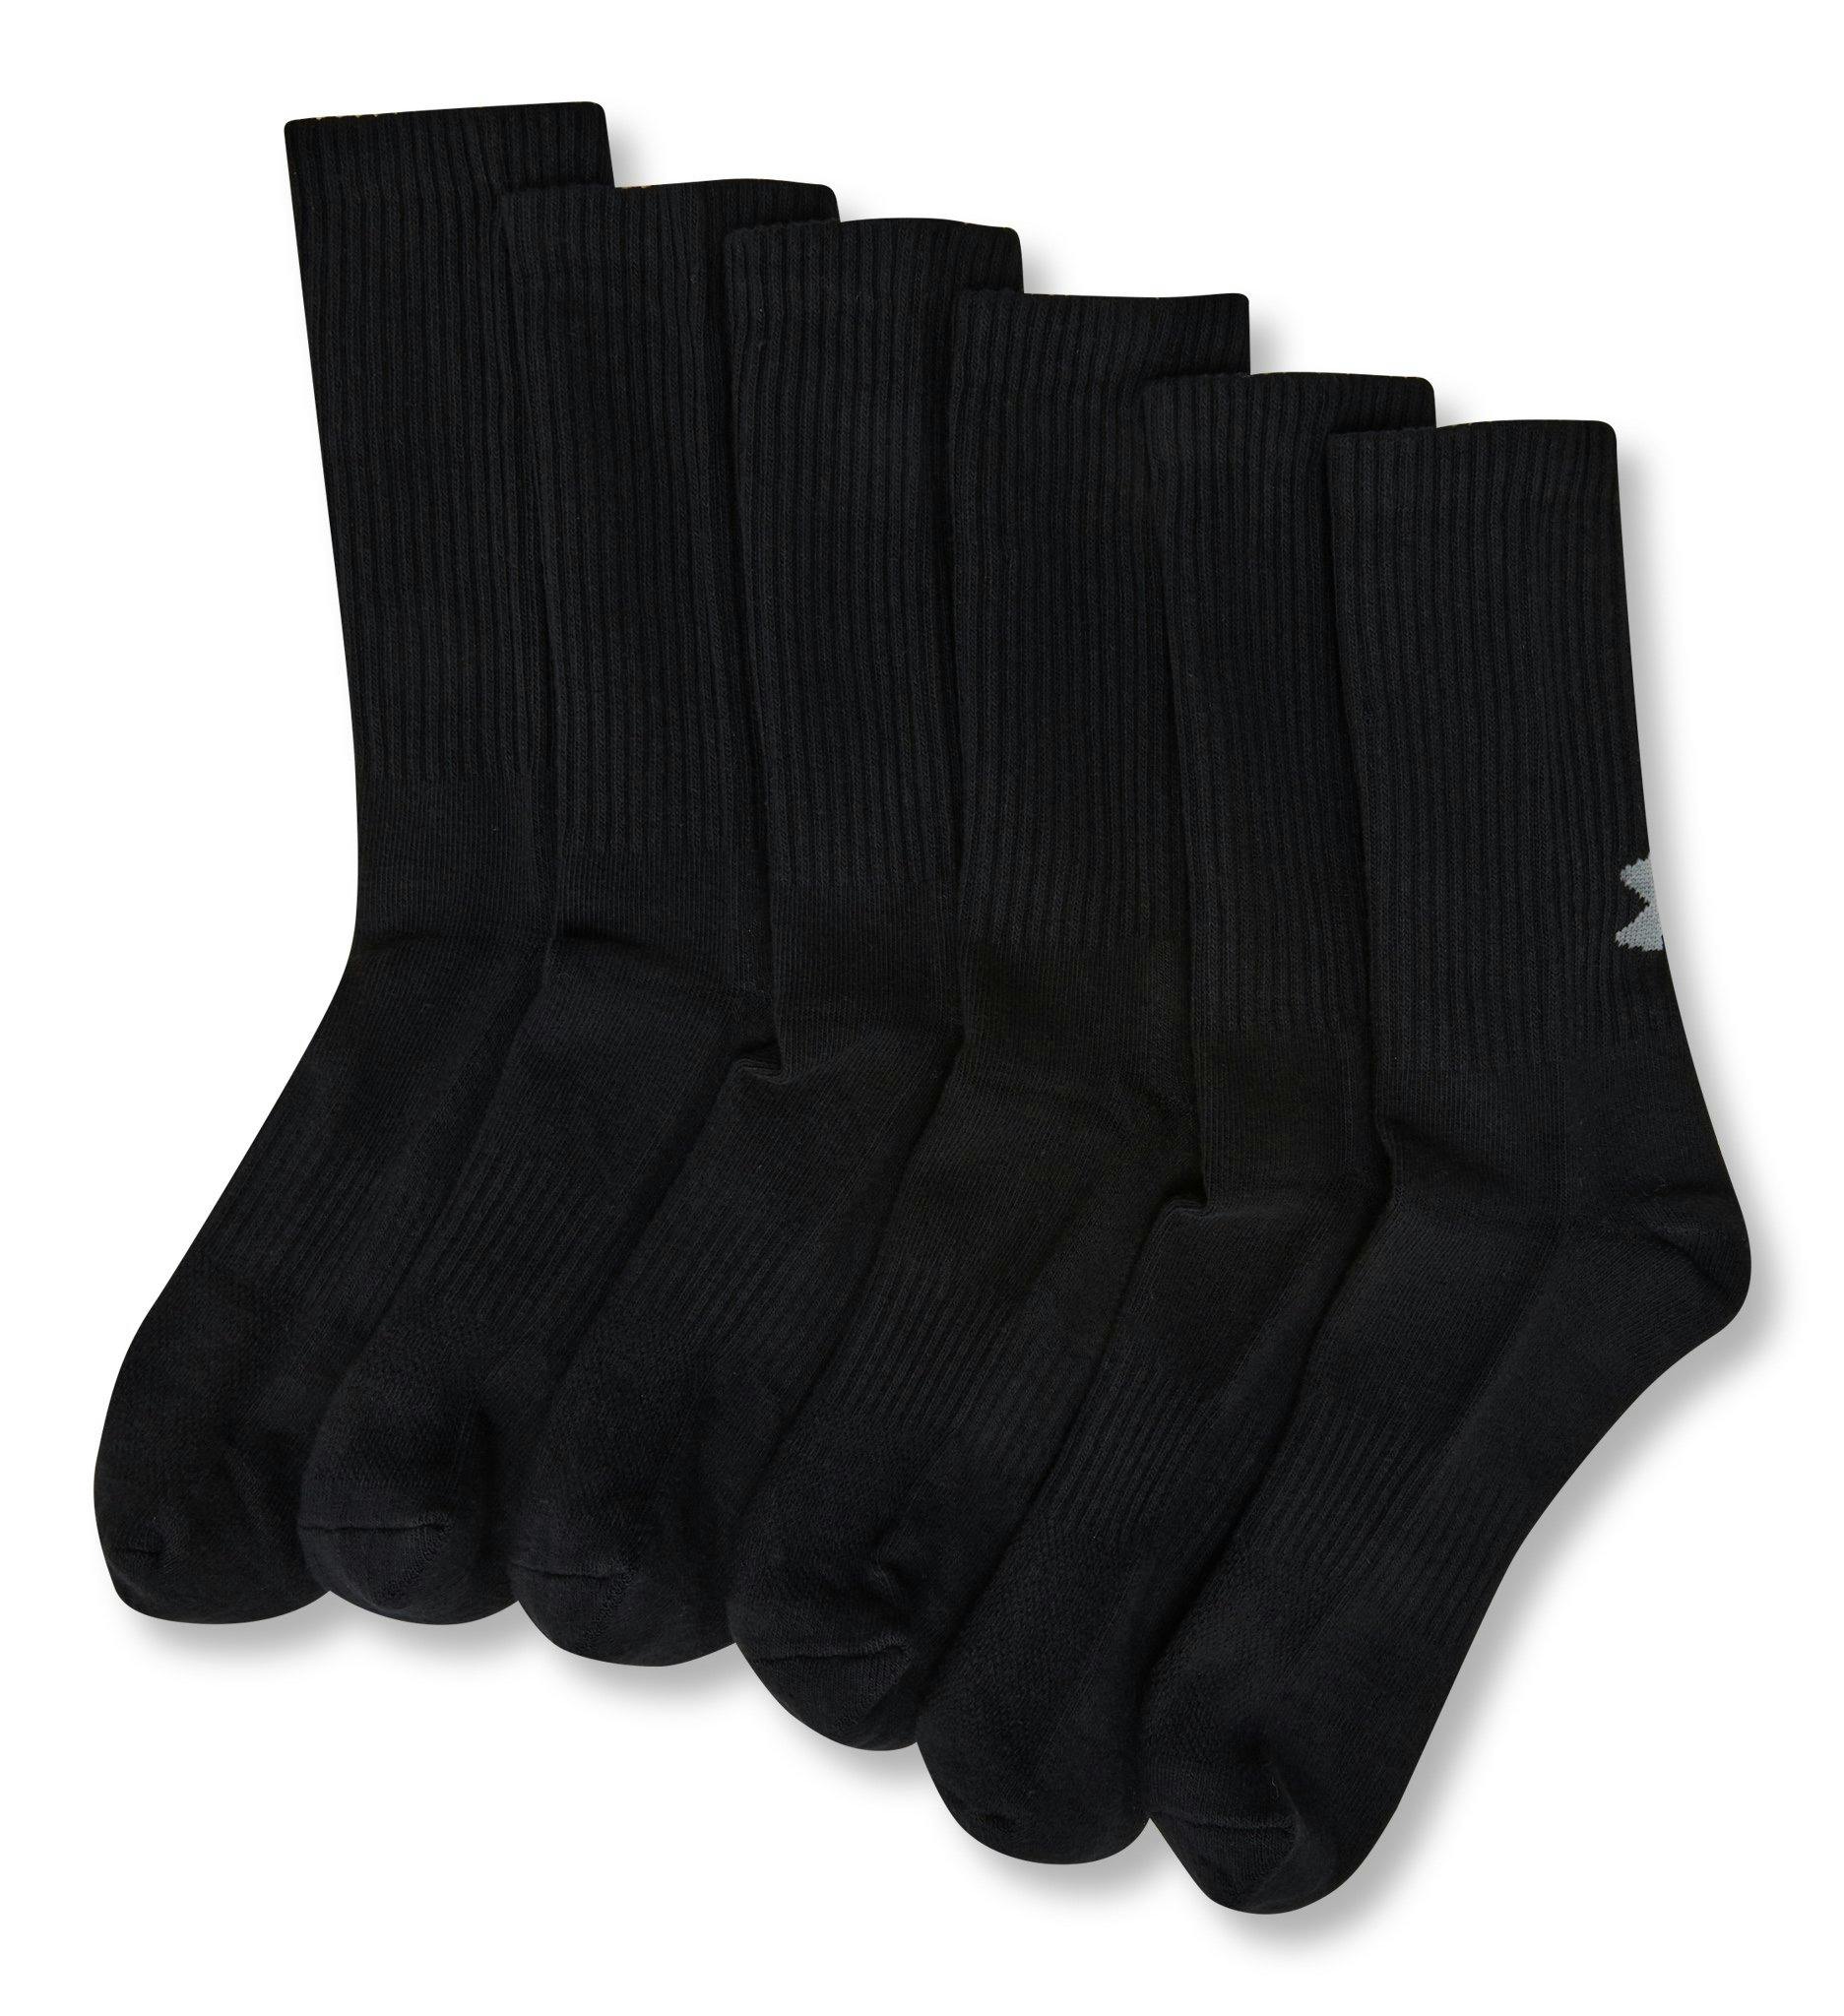 Product image for Training Cotton Crew Socks 6 Pack - Men's